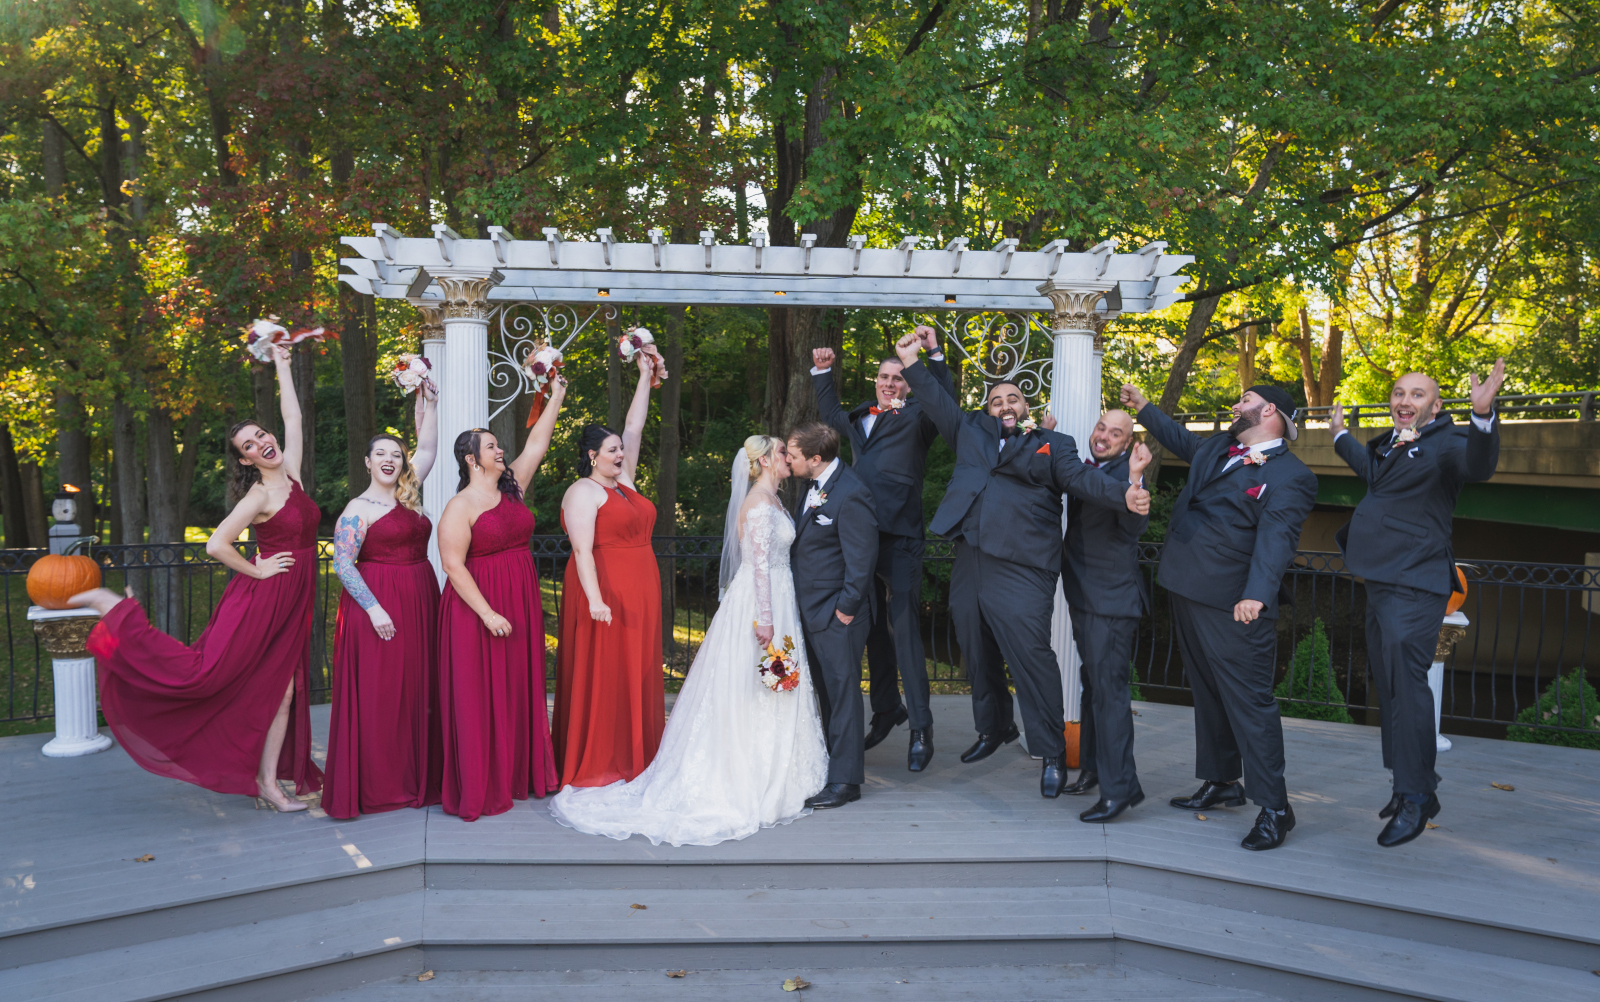 Bride and groom kiss, bridal party cheering, bridal party portrait, cute bridal party portrait, fun bridal party portrait, fun pose, wooden arch with pillars, green, nature, trees, fall wedding, cute outdoor wedding ceremony at Grand Pacific Wedding Gardens